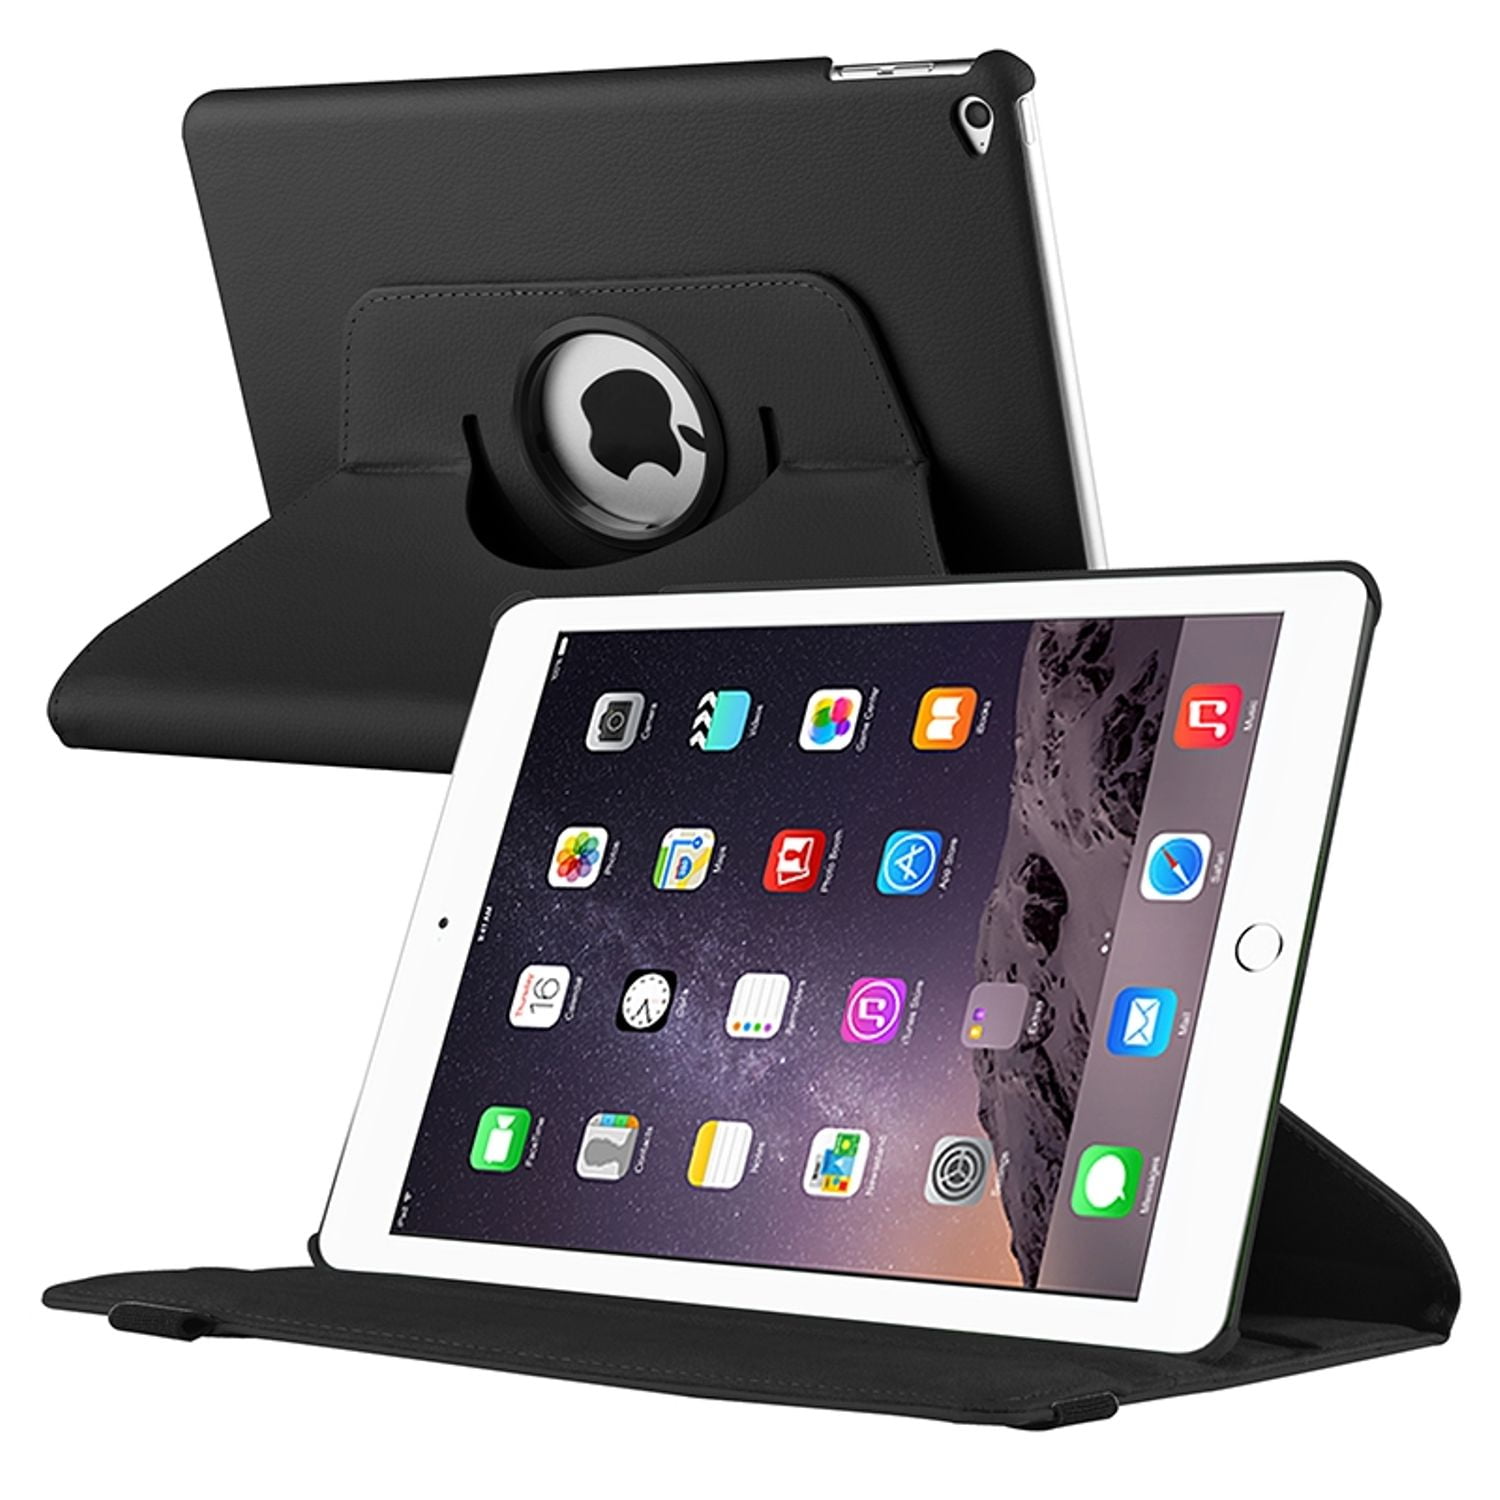 Insten Black 360 Degree Rotating Multi View Stand Leather Case Cover For Apple iPad Air 2 (iPad 6)